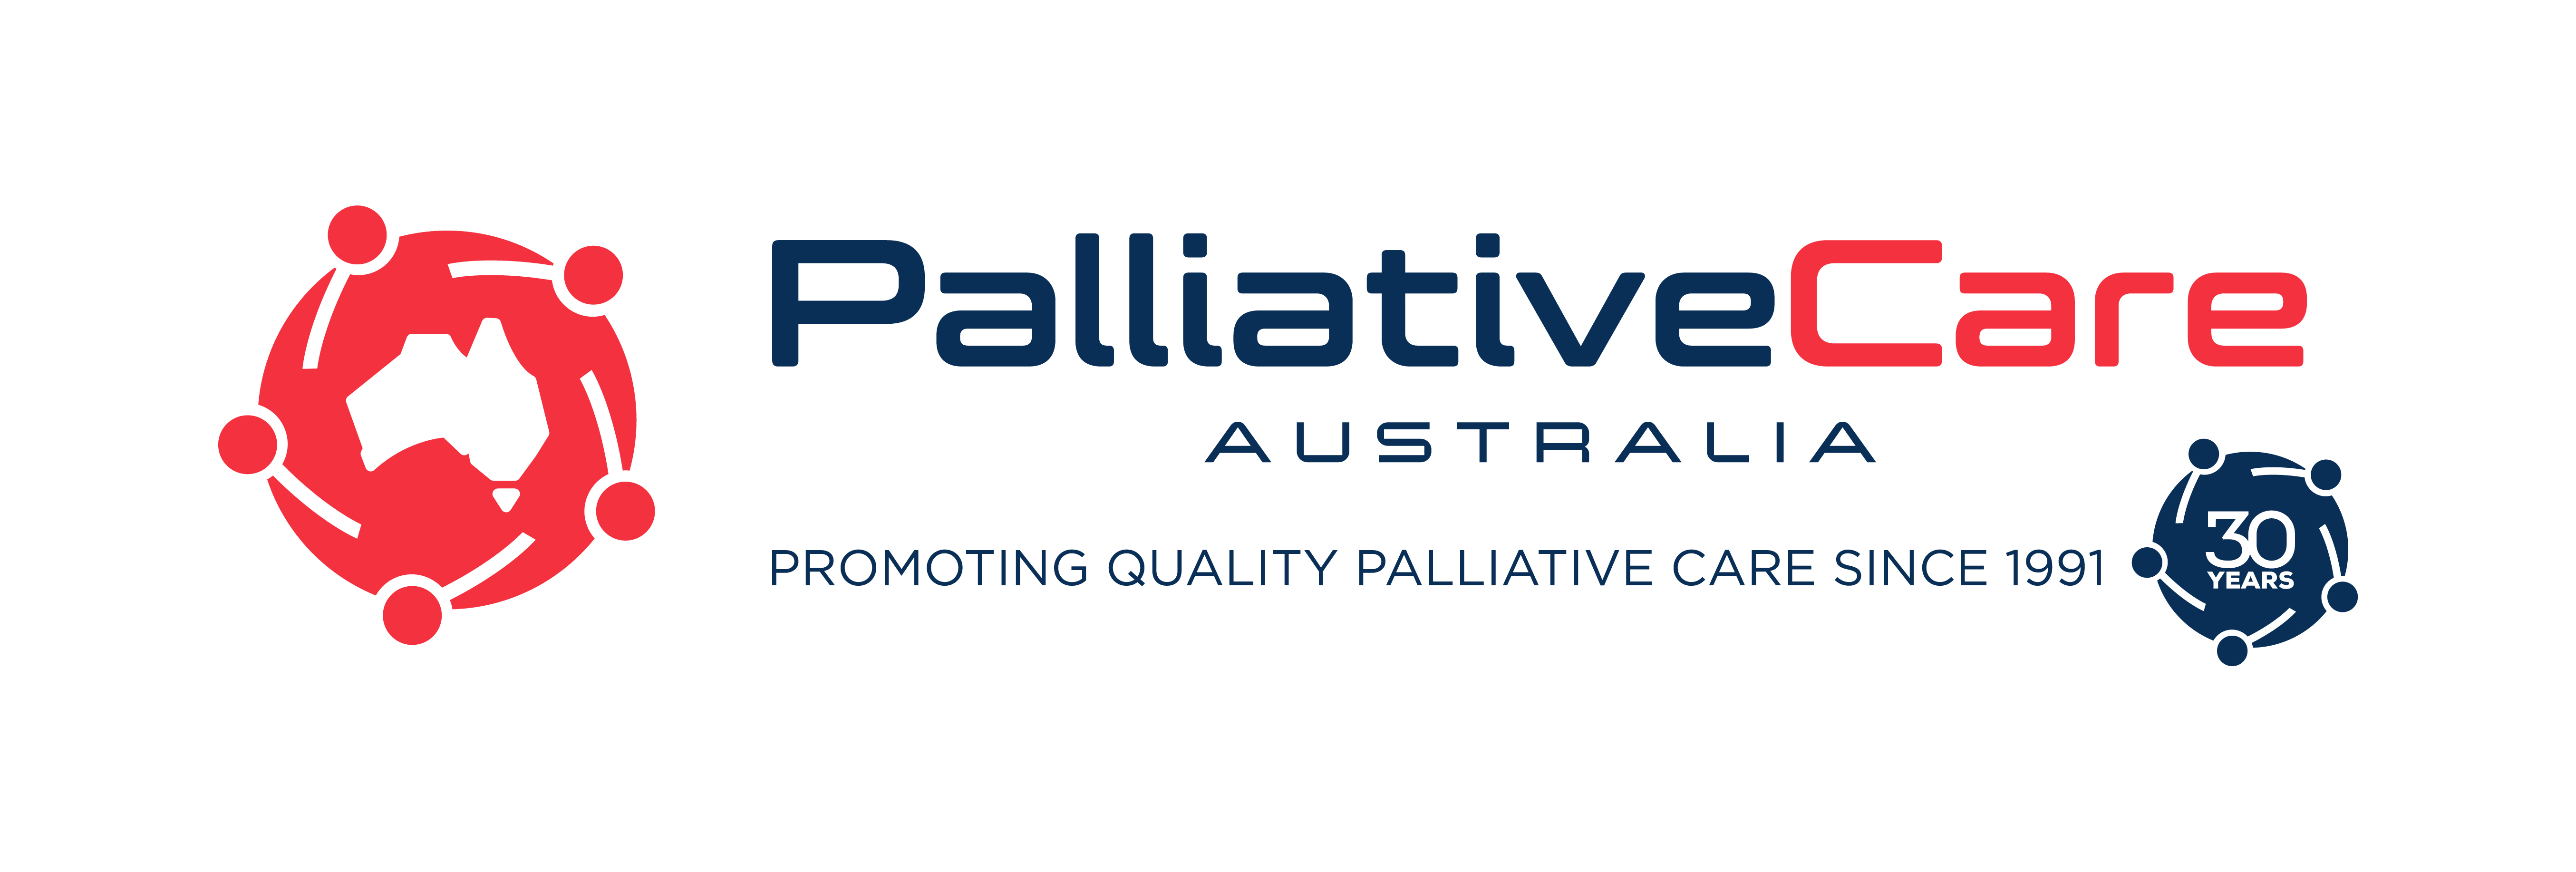 Celebrating 30 years of advocating for quality palliative care - Palliative Care